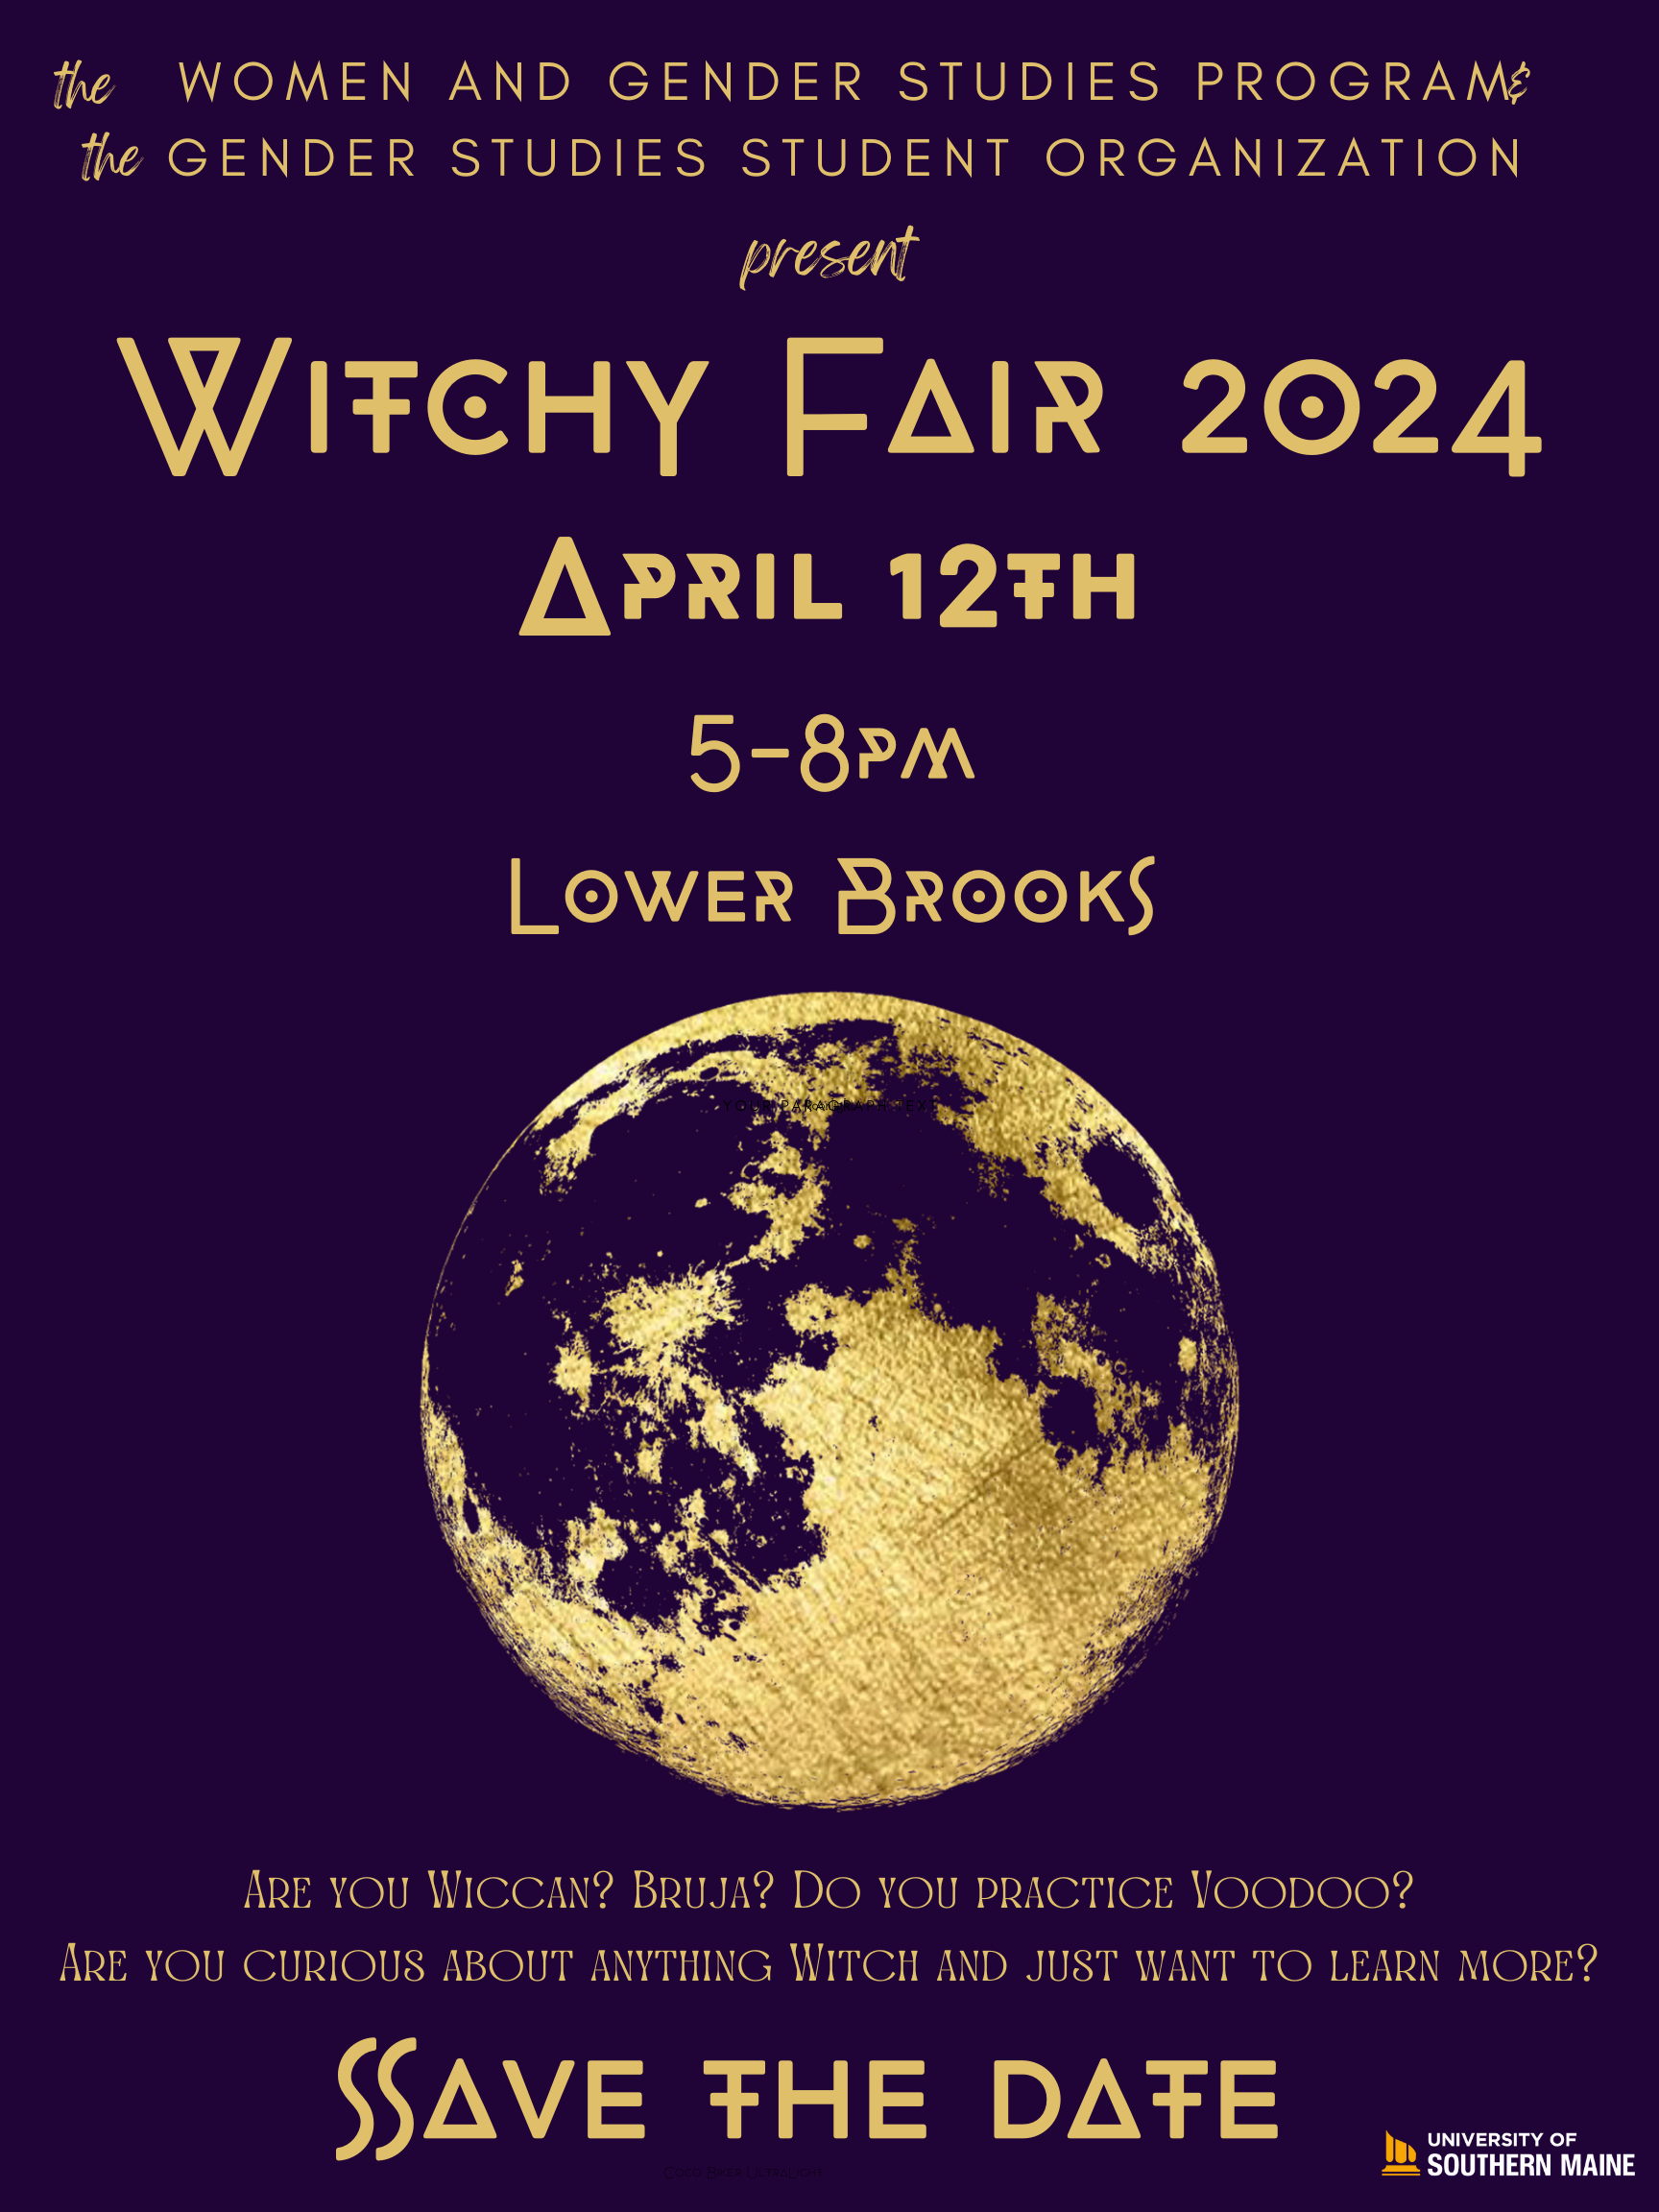 The Women and Gender Studies Program and the Gender Studies Student Organization present the Witchy Fair 2024, April 12th, 5-8 P.M. Lower Brooks, Gorham Campus